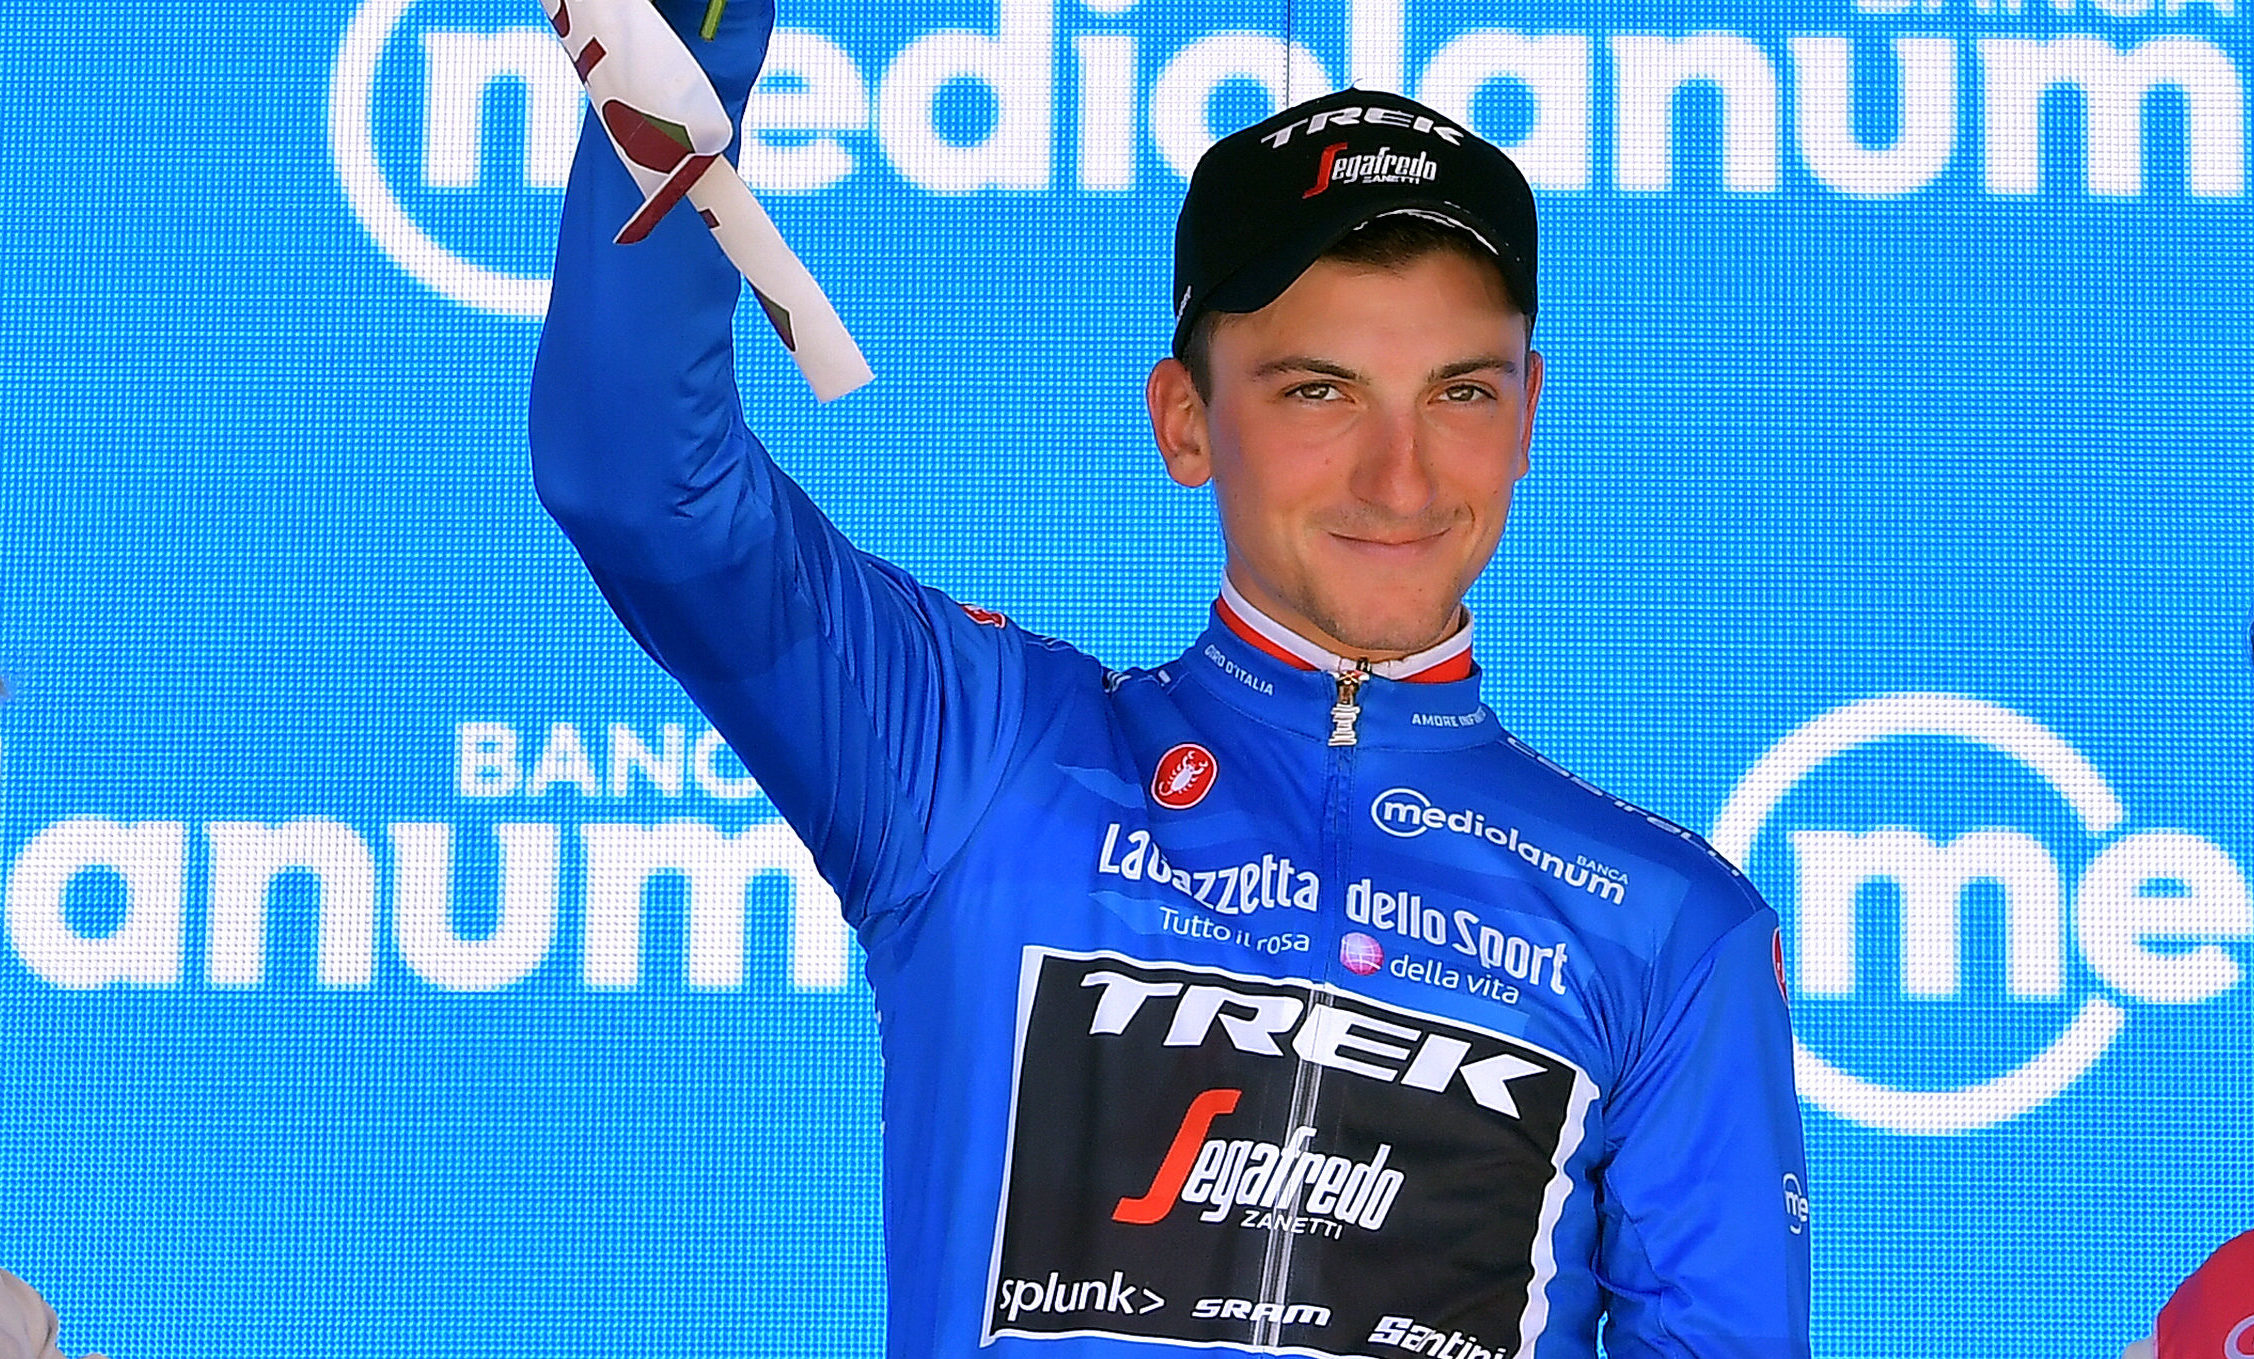 Ciccone 3rd in final mountain stage, secures blue jersey | Trek Race Shop